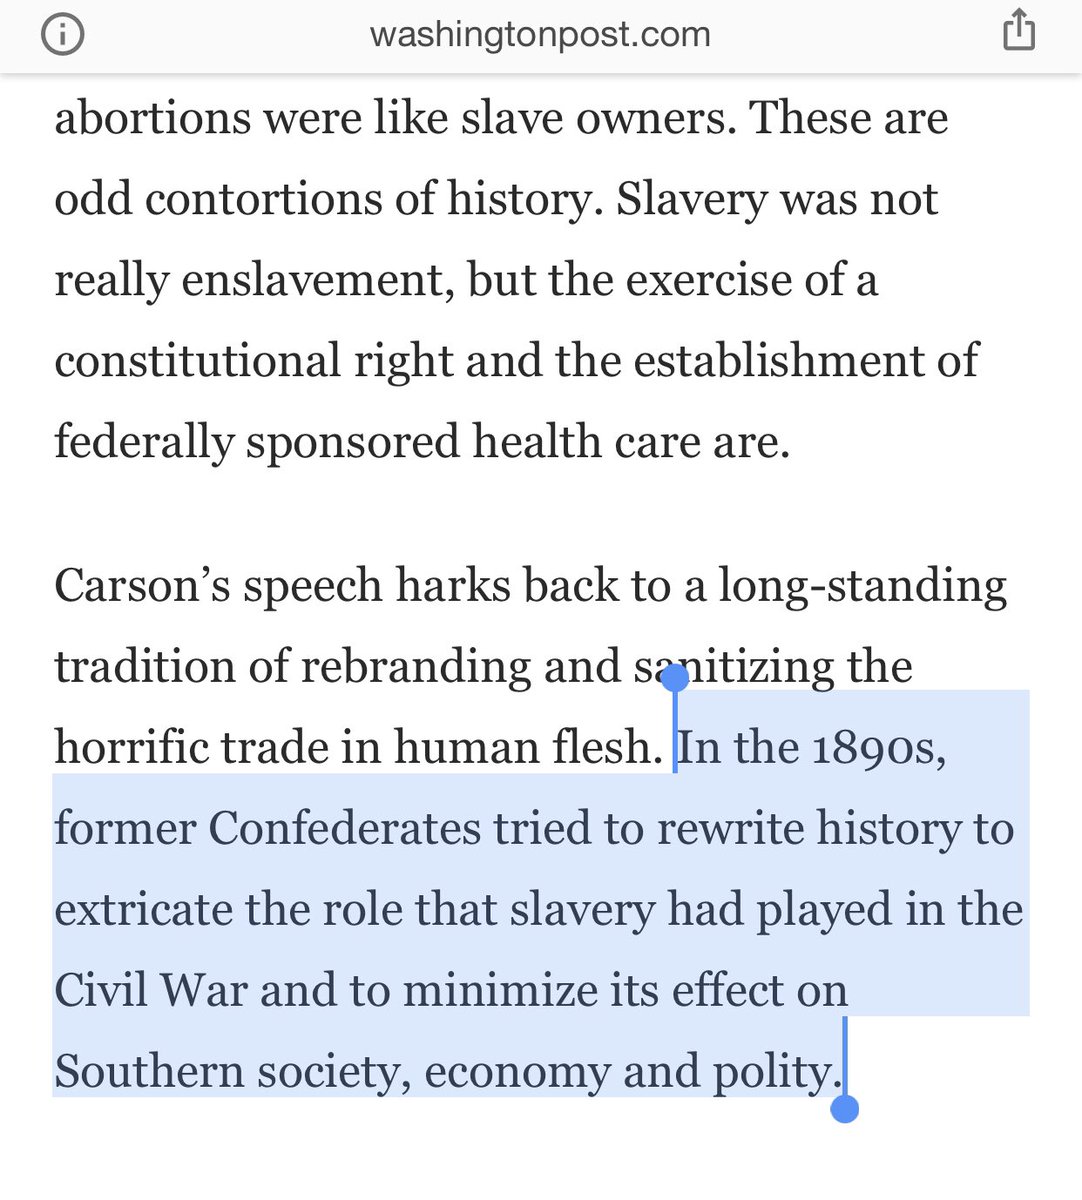    “In the 1890s, former Confederates tried to rewrite history to extricate the role that slavery had played in the Civil War and to minimize its effect on Southern society, economy and polity. These are not innocent gaffes.”